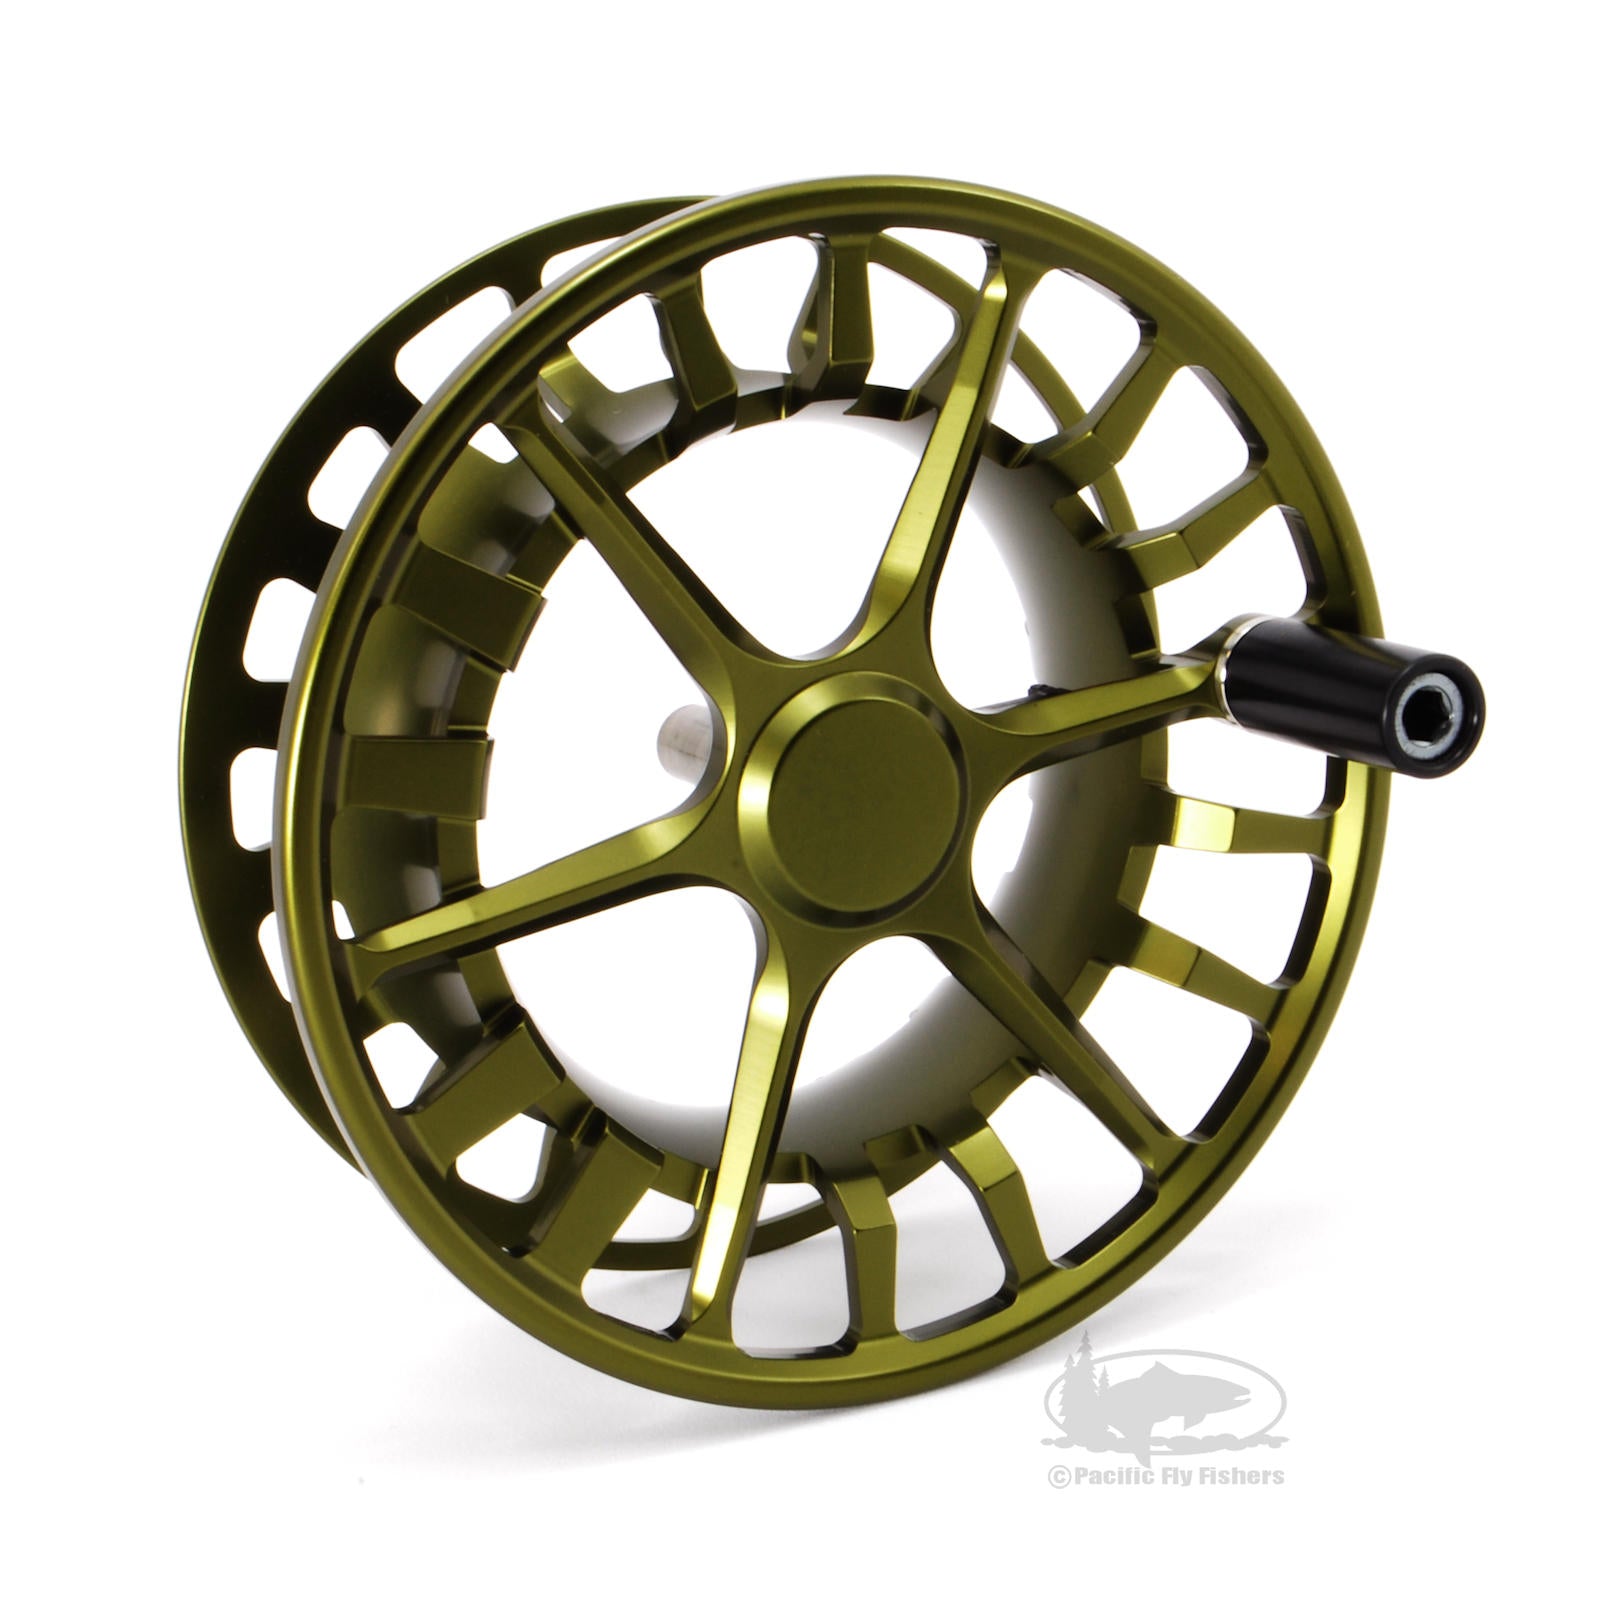 Lamson Velocity 1.5 large arbor trout fly reel with case and box